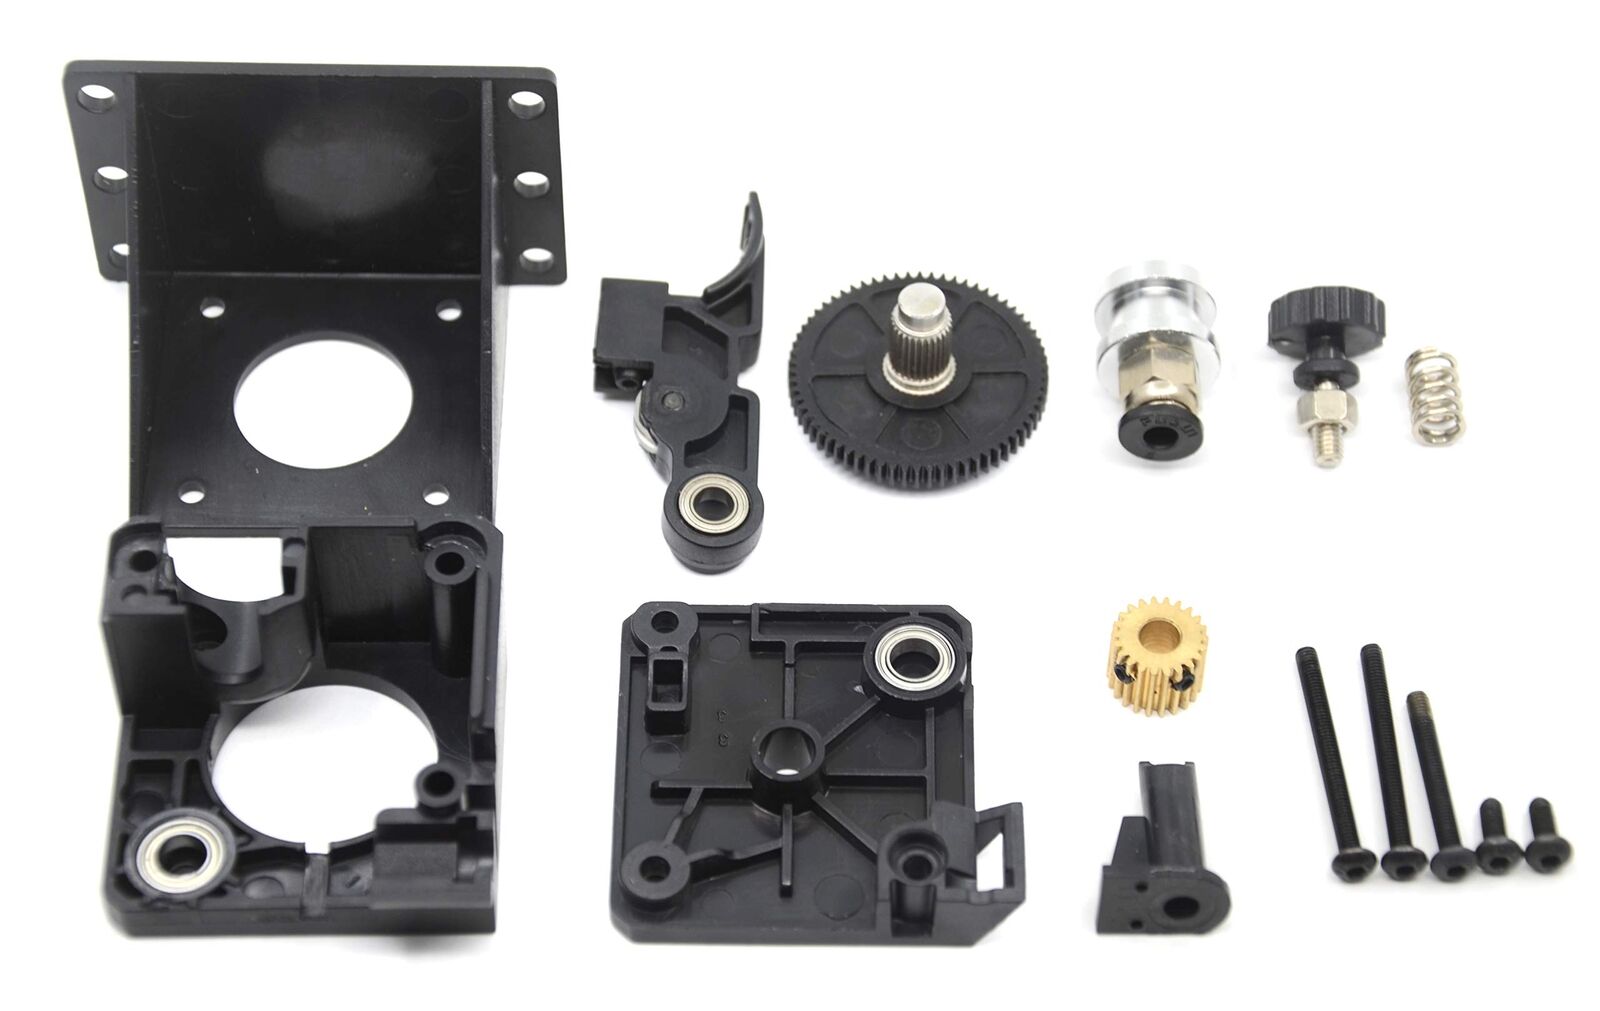 Upgraded 3d Printer Extruder Parts With Mounting Bracket For Anycubic Megascr10v